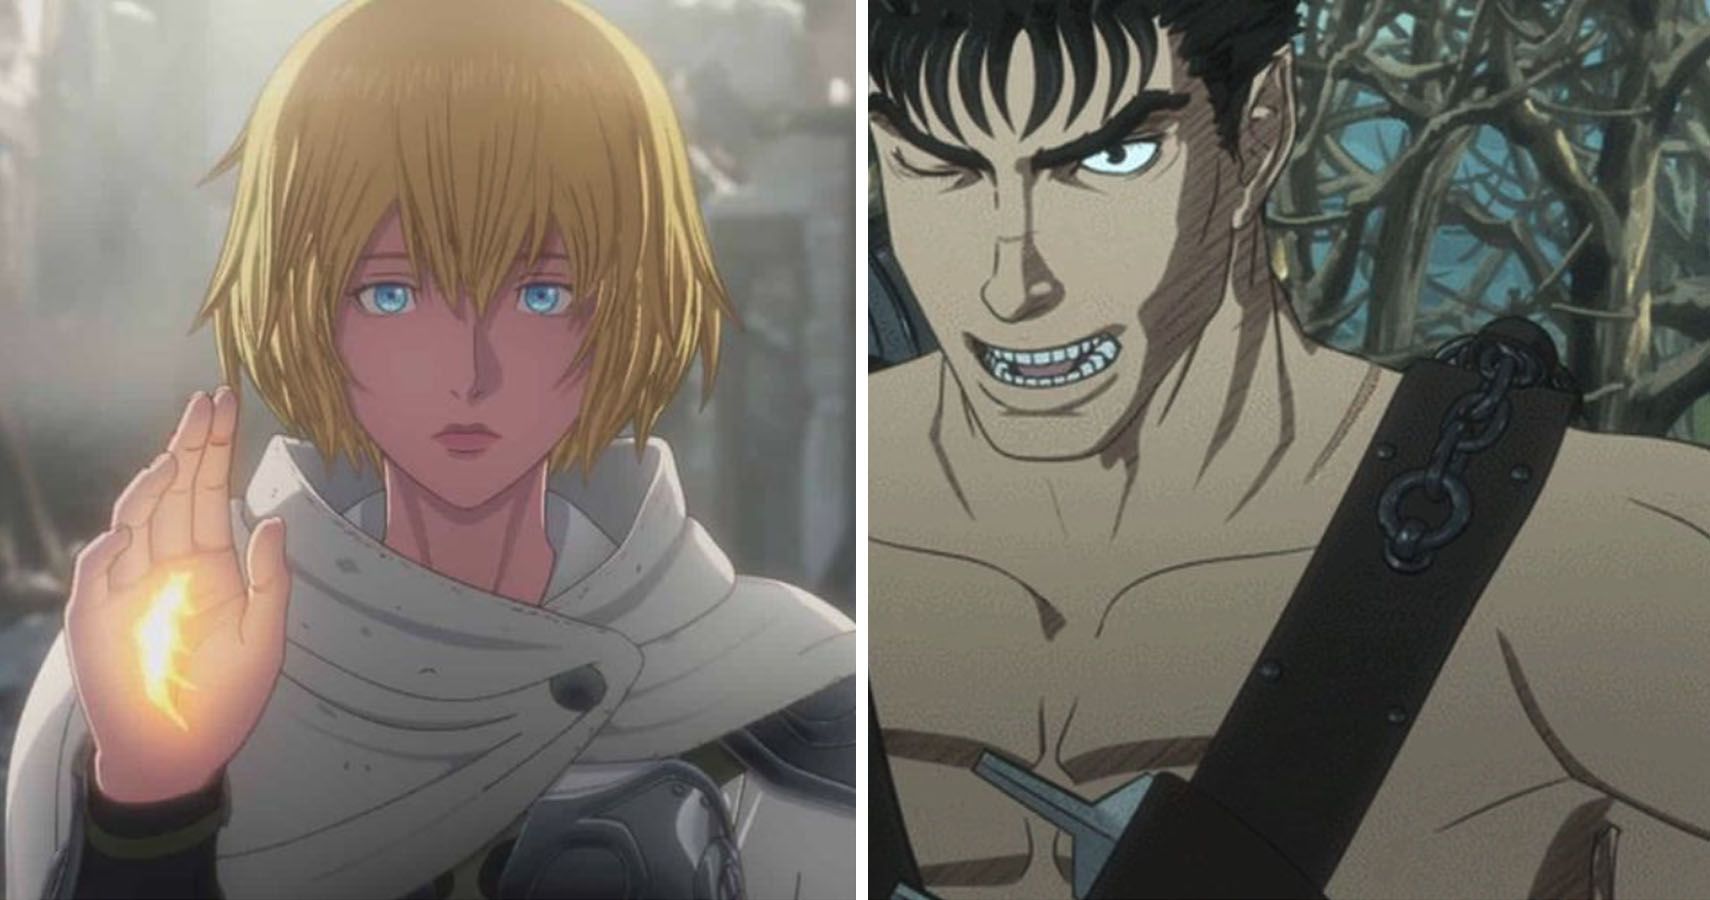 Dragon S Dogma 5 Reasons Why Its Cgi Is Better Than Berserk S 5 Why It S Worse